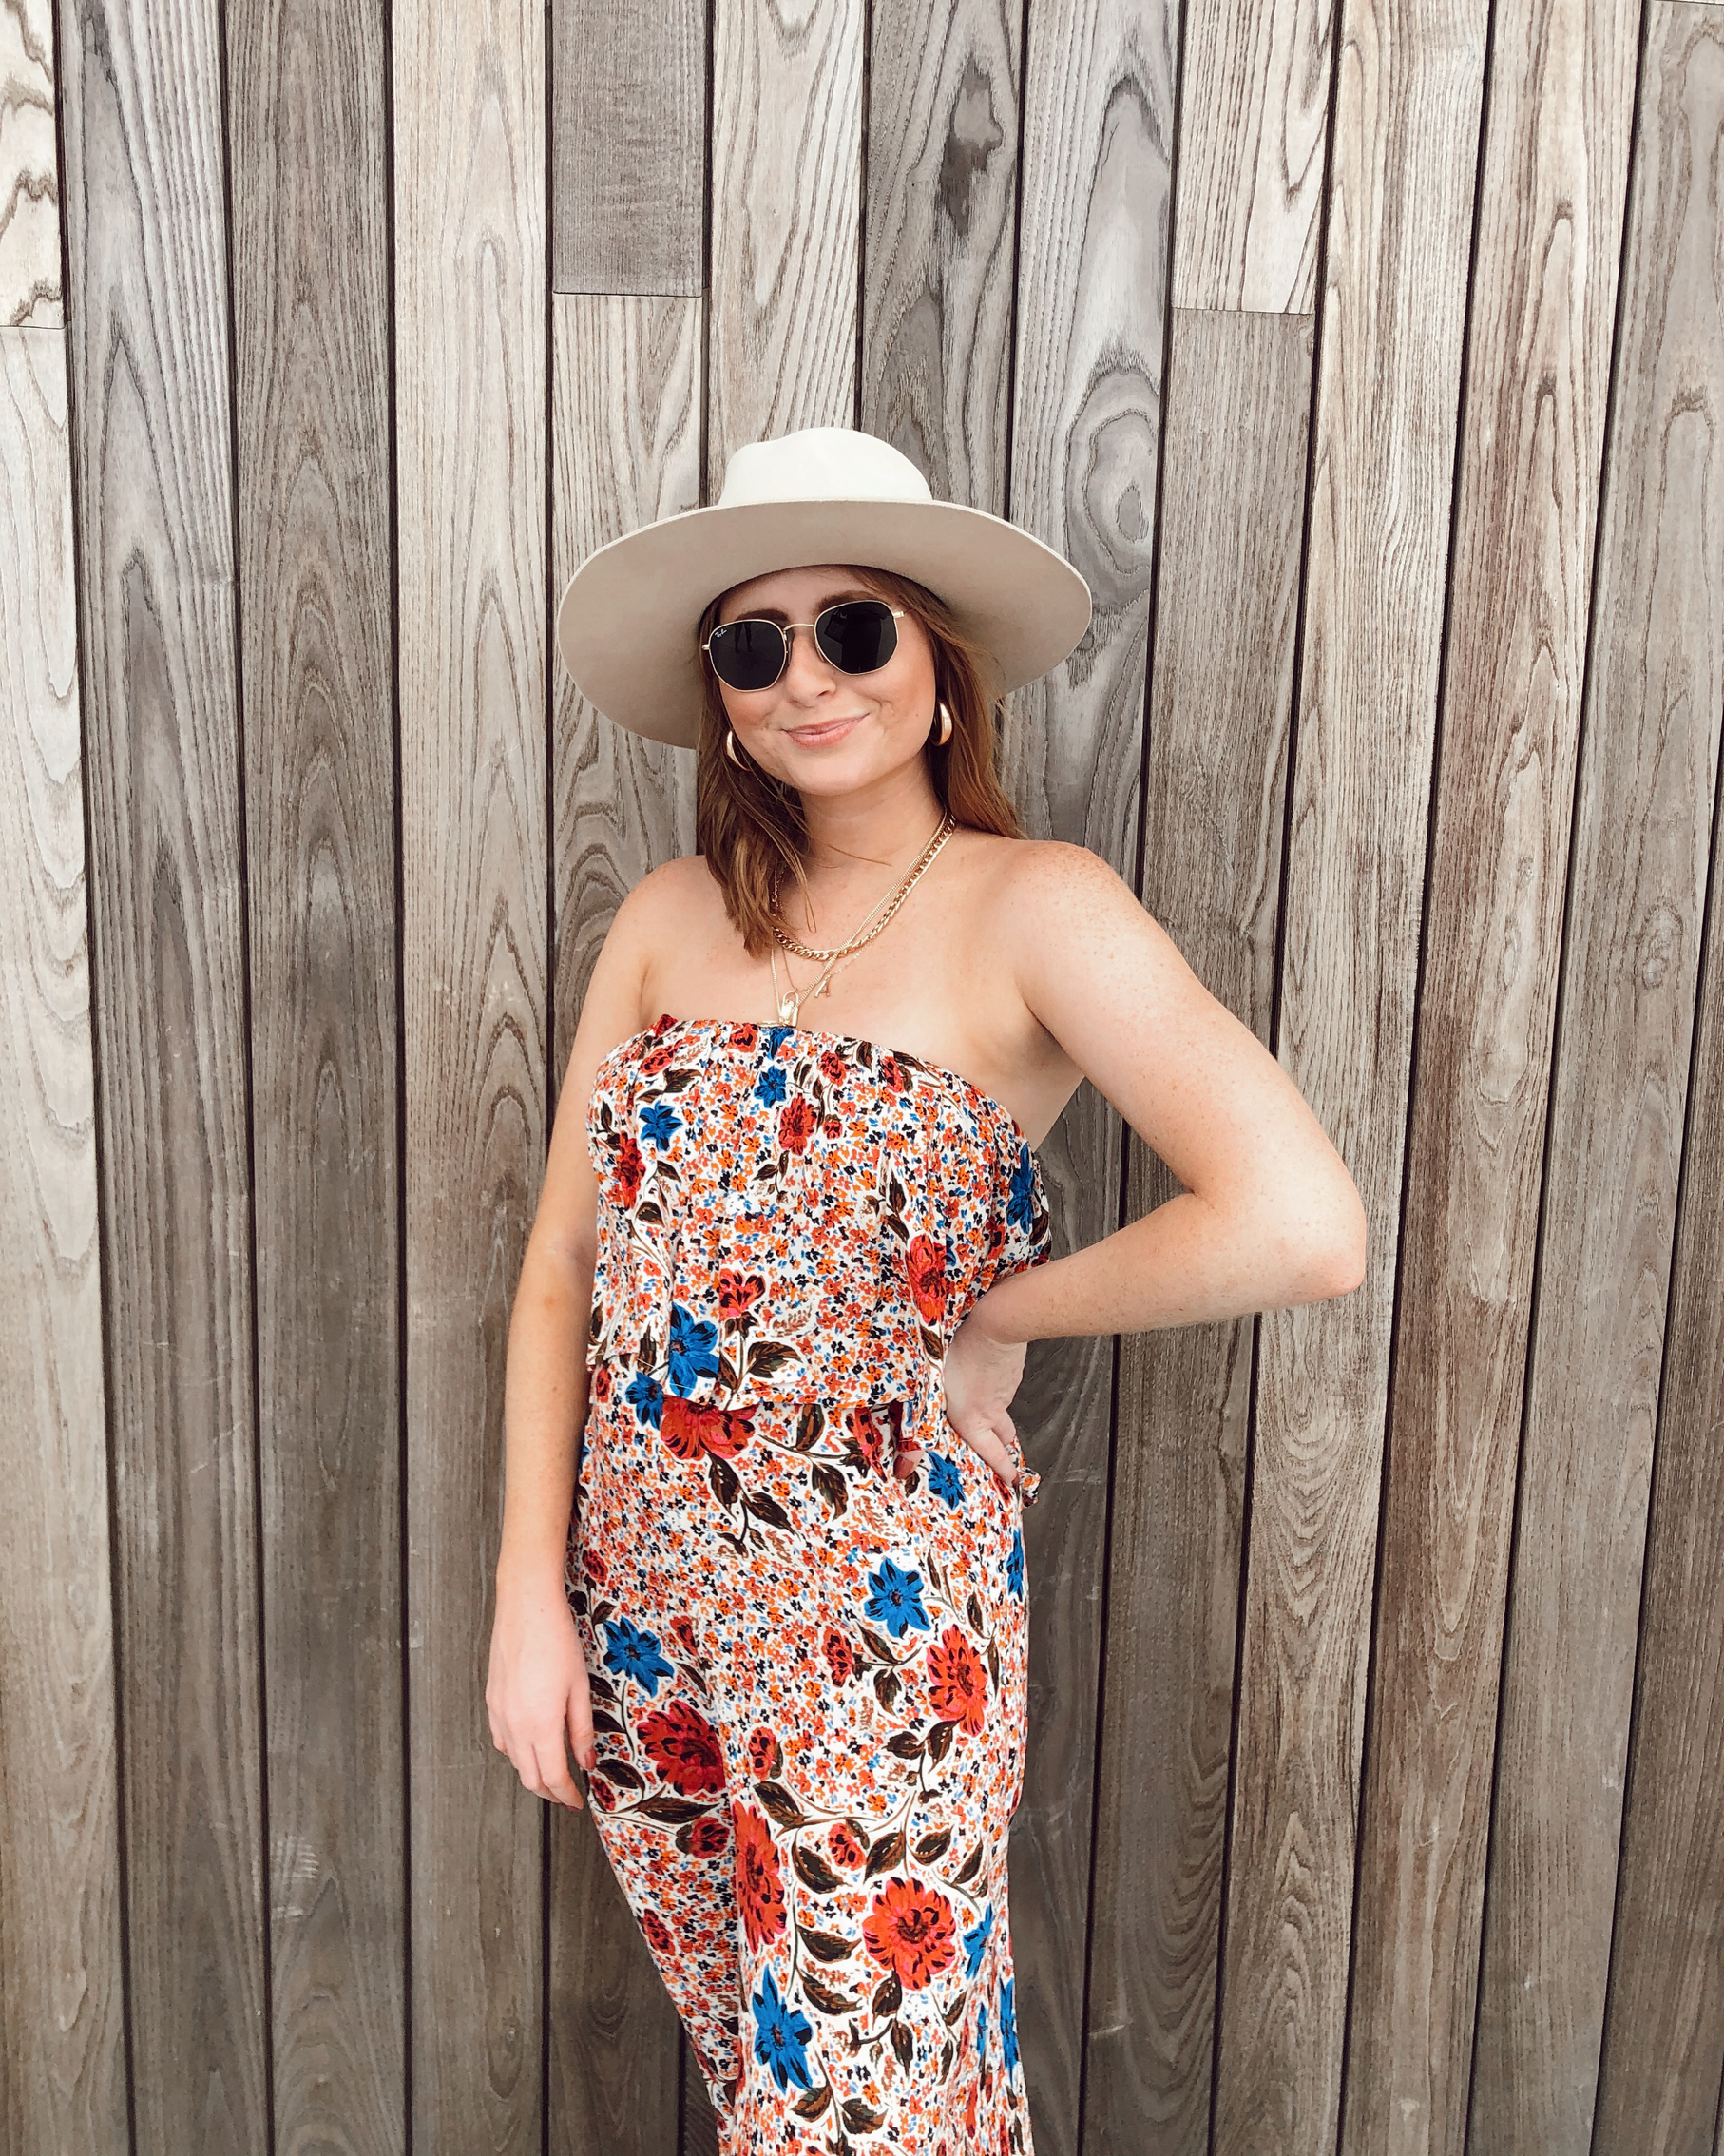 Fall Transition Outfit: Fall Ruffle Floral Romper - Have Need Want